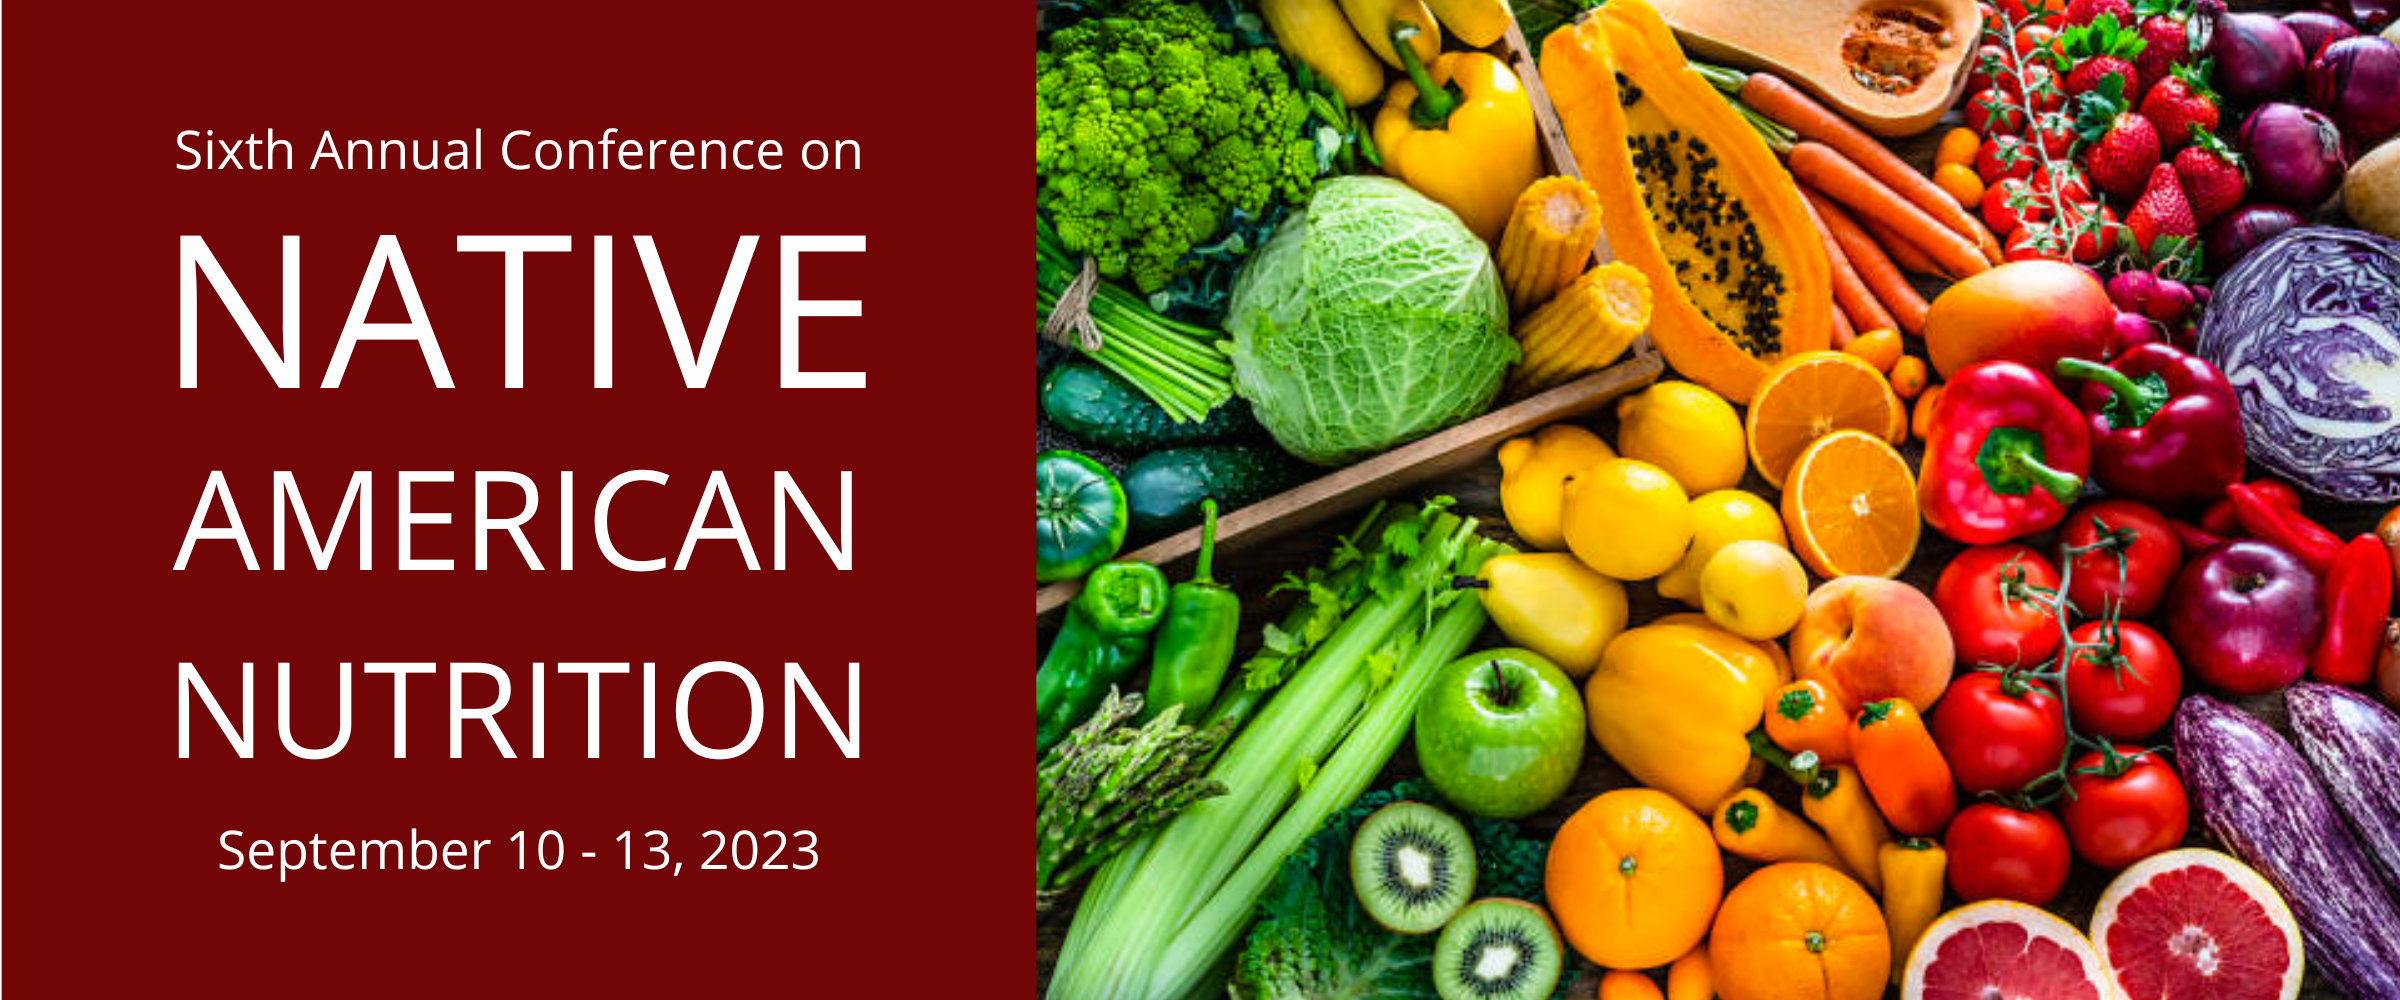 6th Annual Conference on Native American Nutrition-- September 10-13, 2023